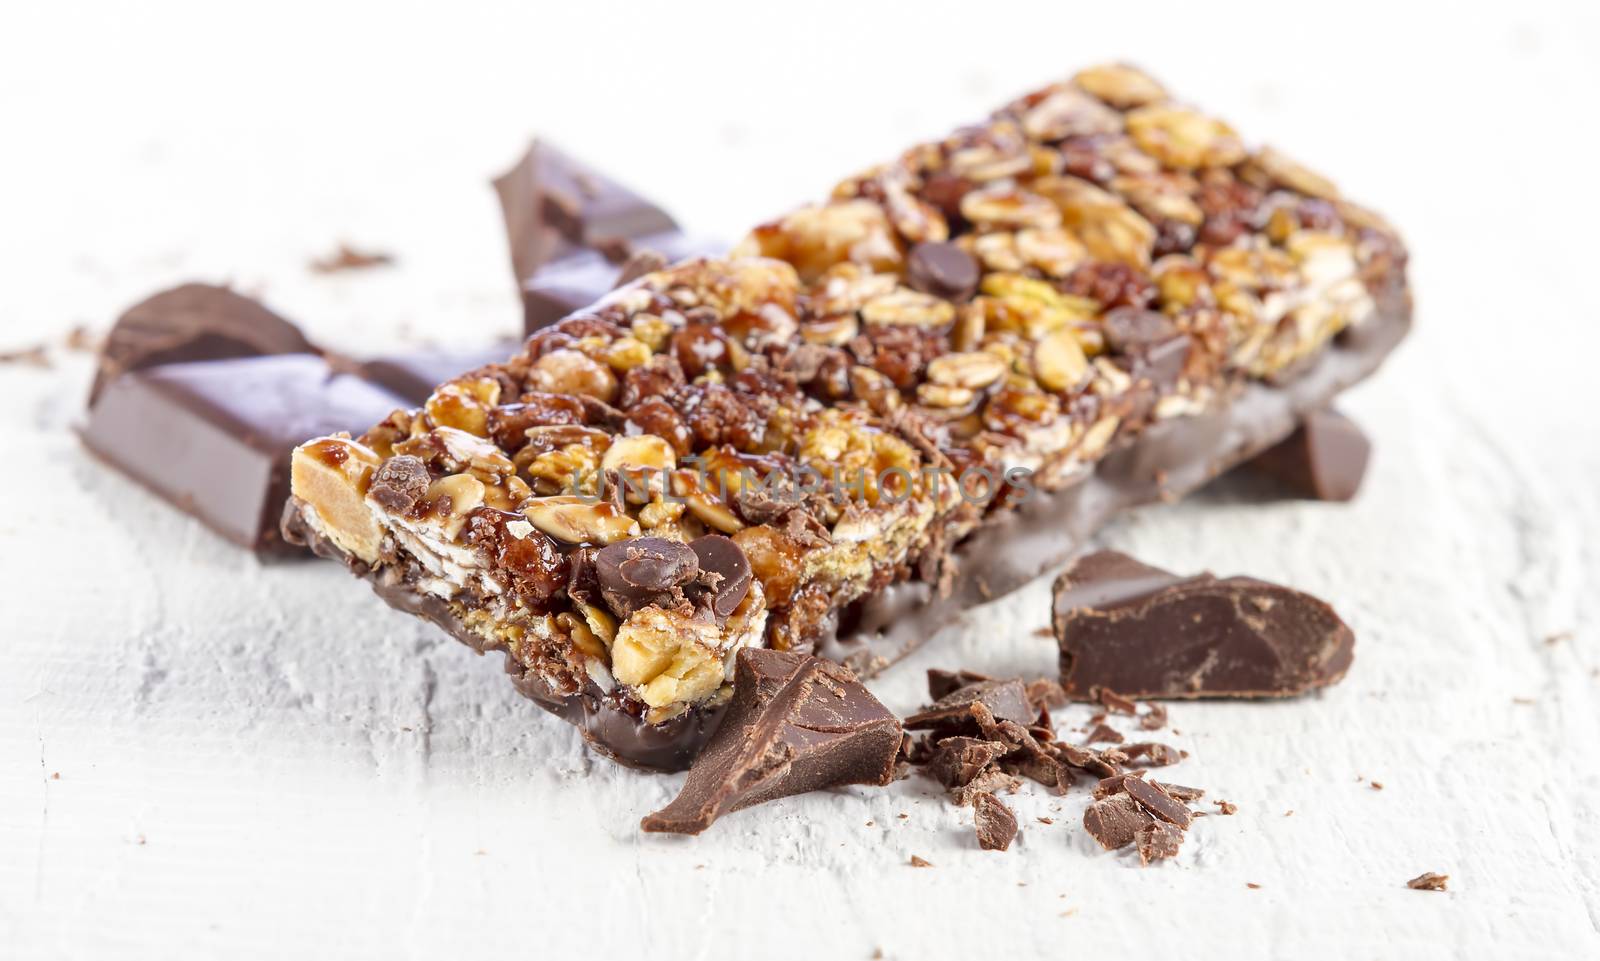 cereal bar with chocolate by manaemedia